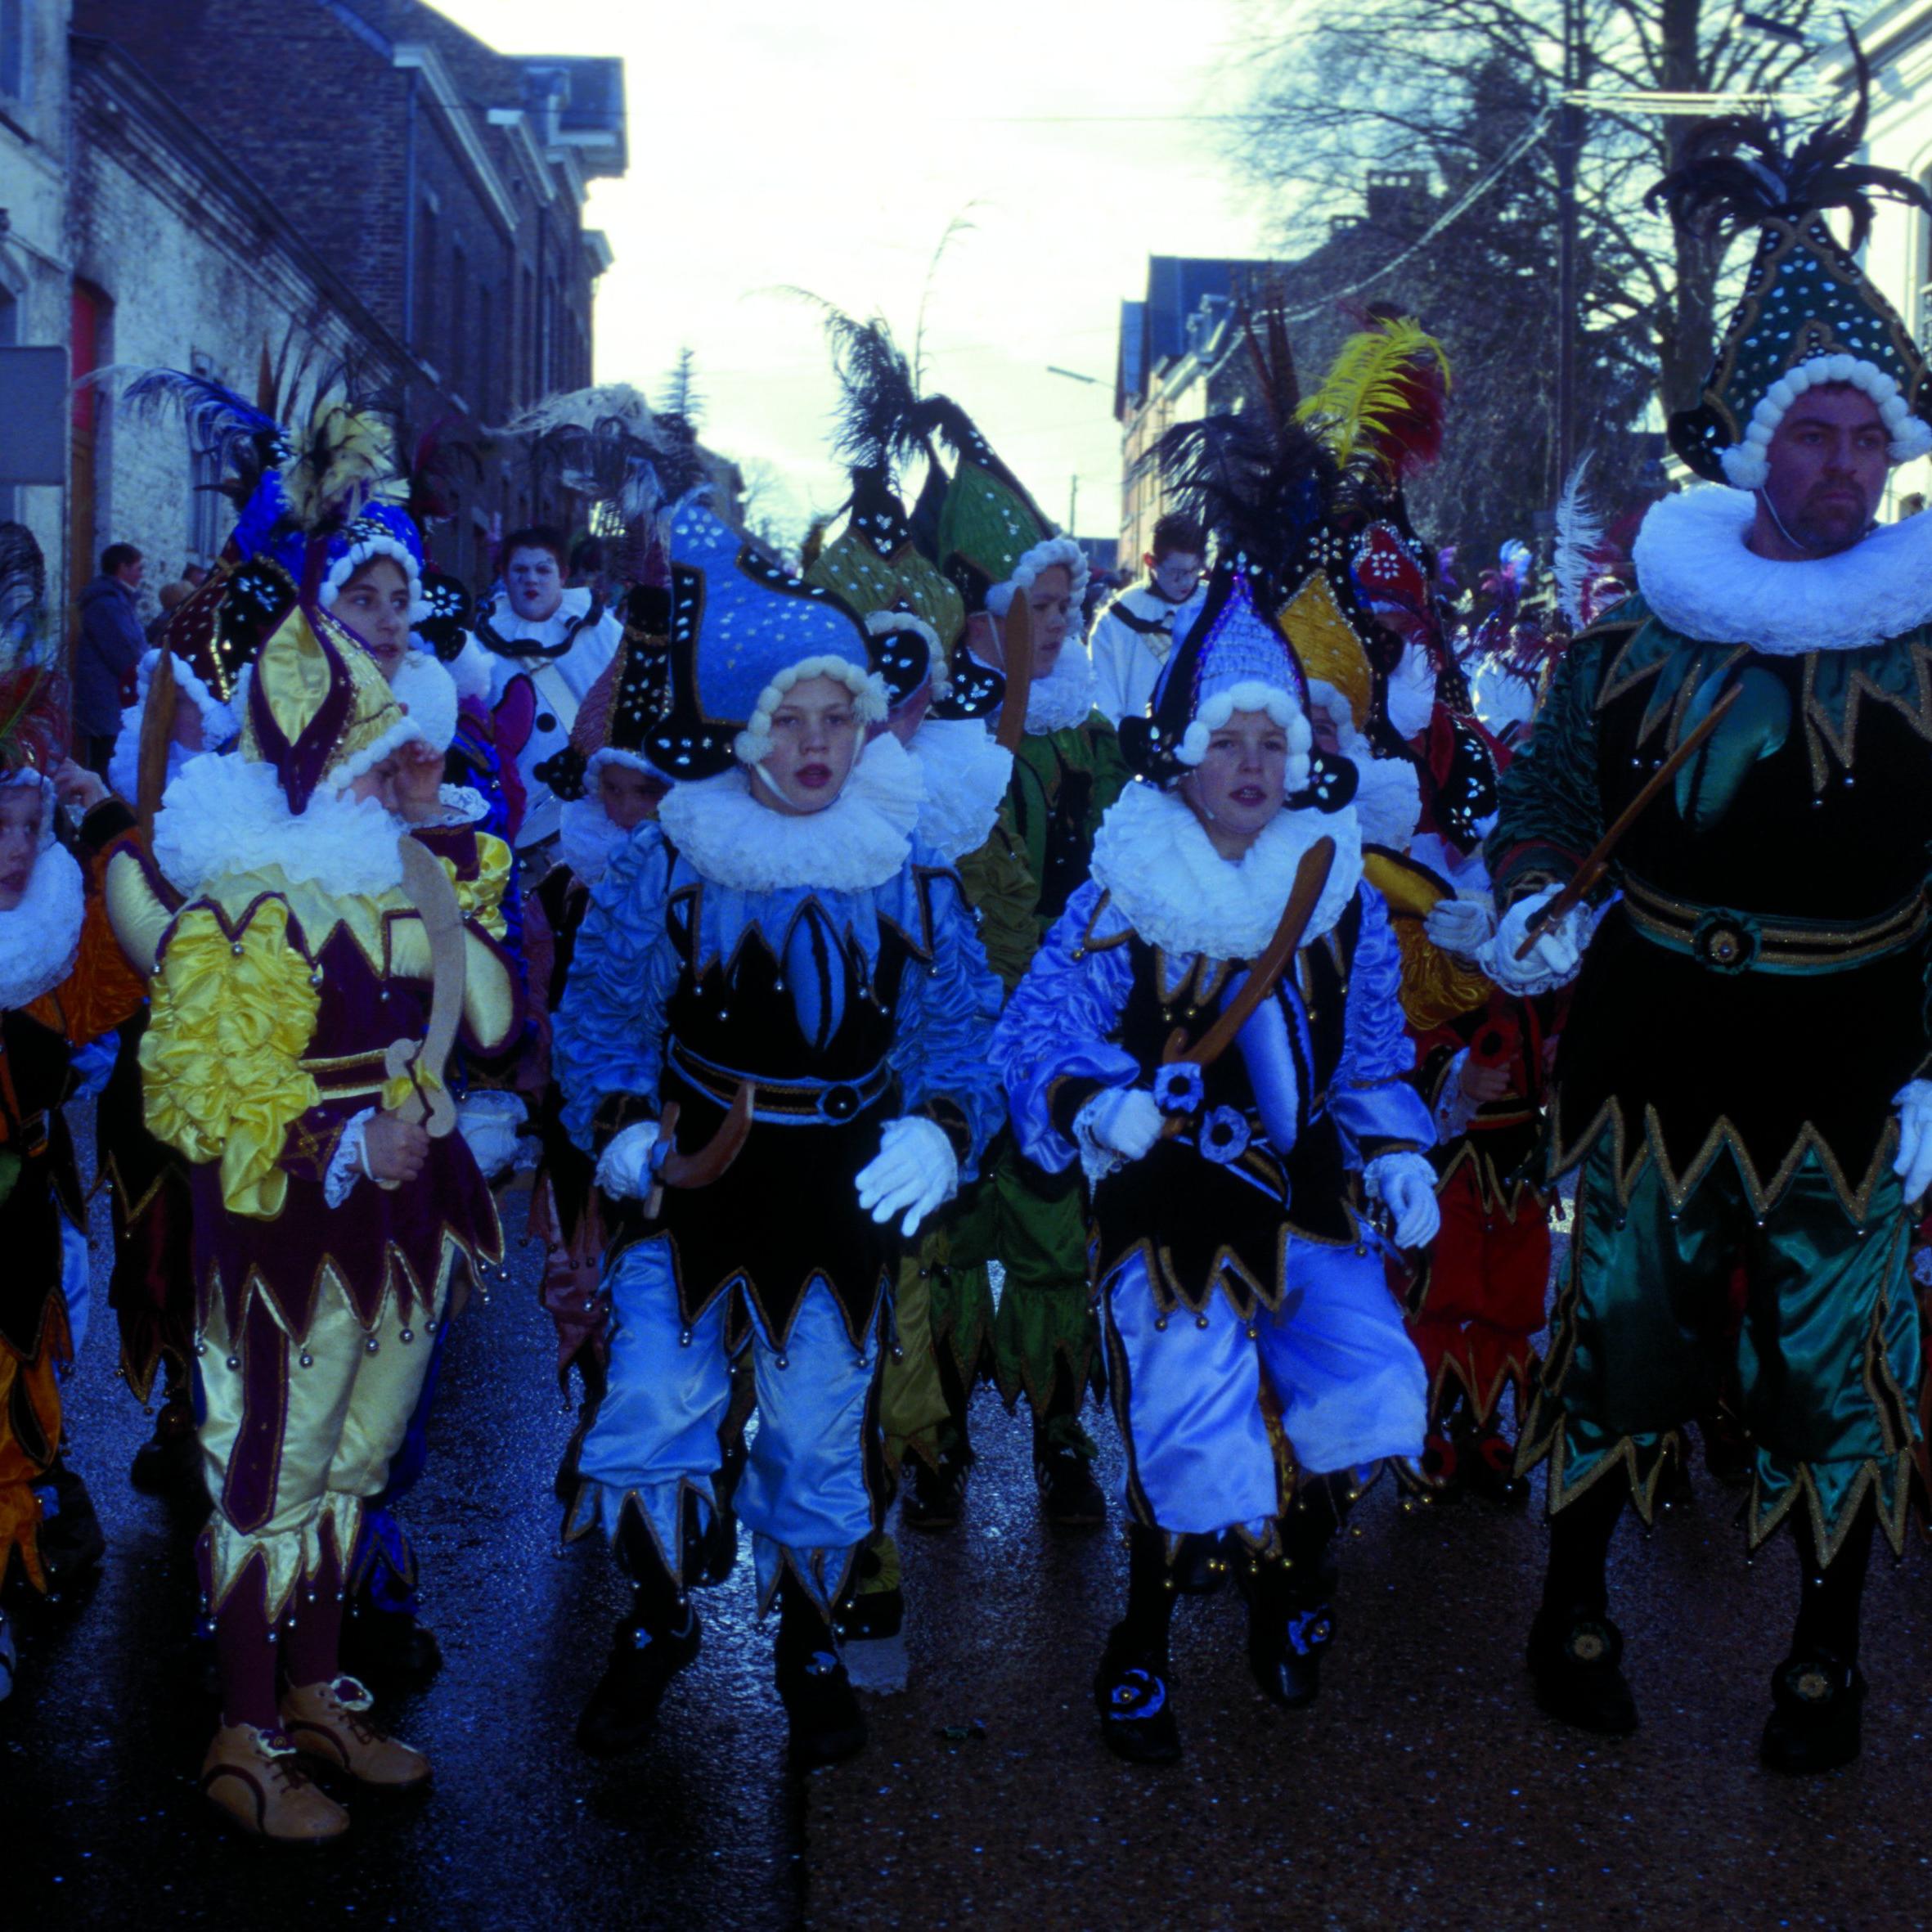 Morlanwelz carnival and folkloric traditions